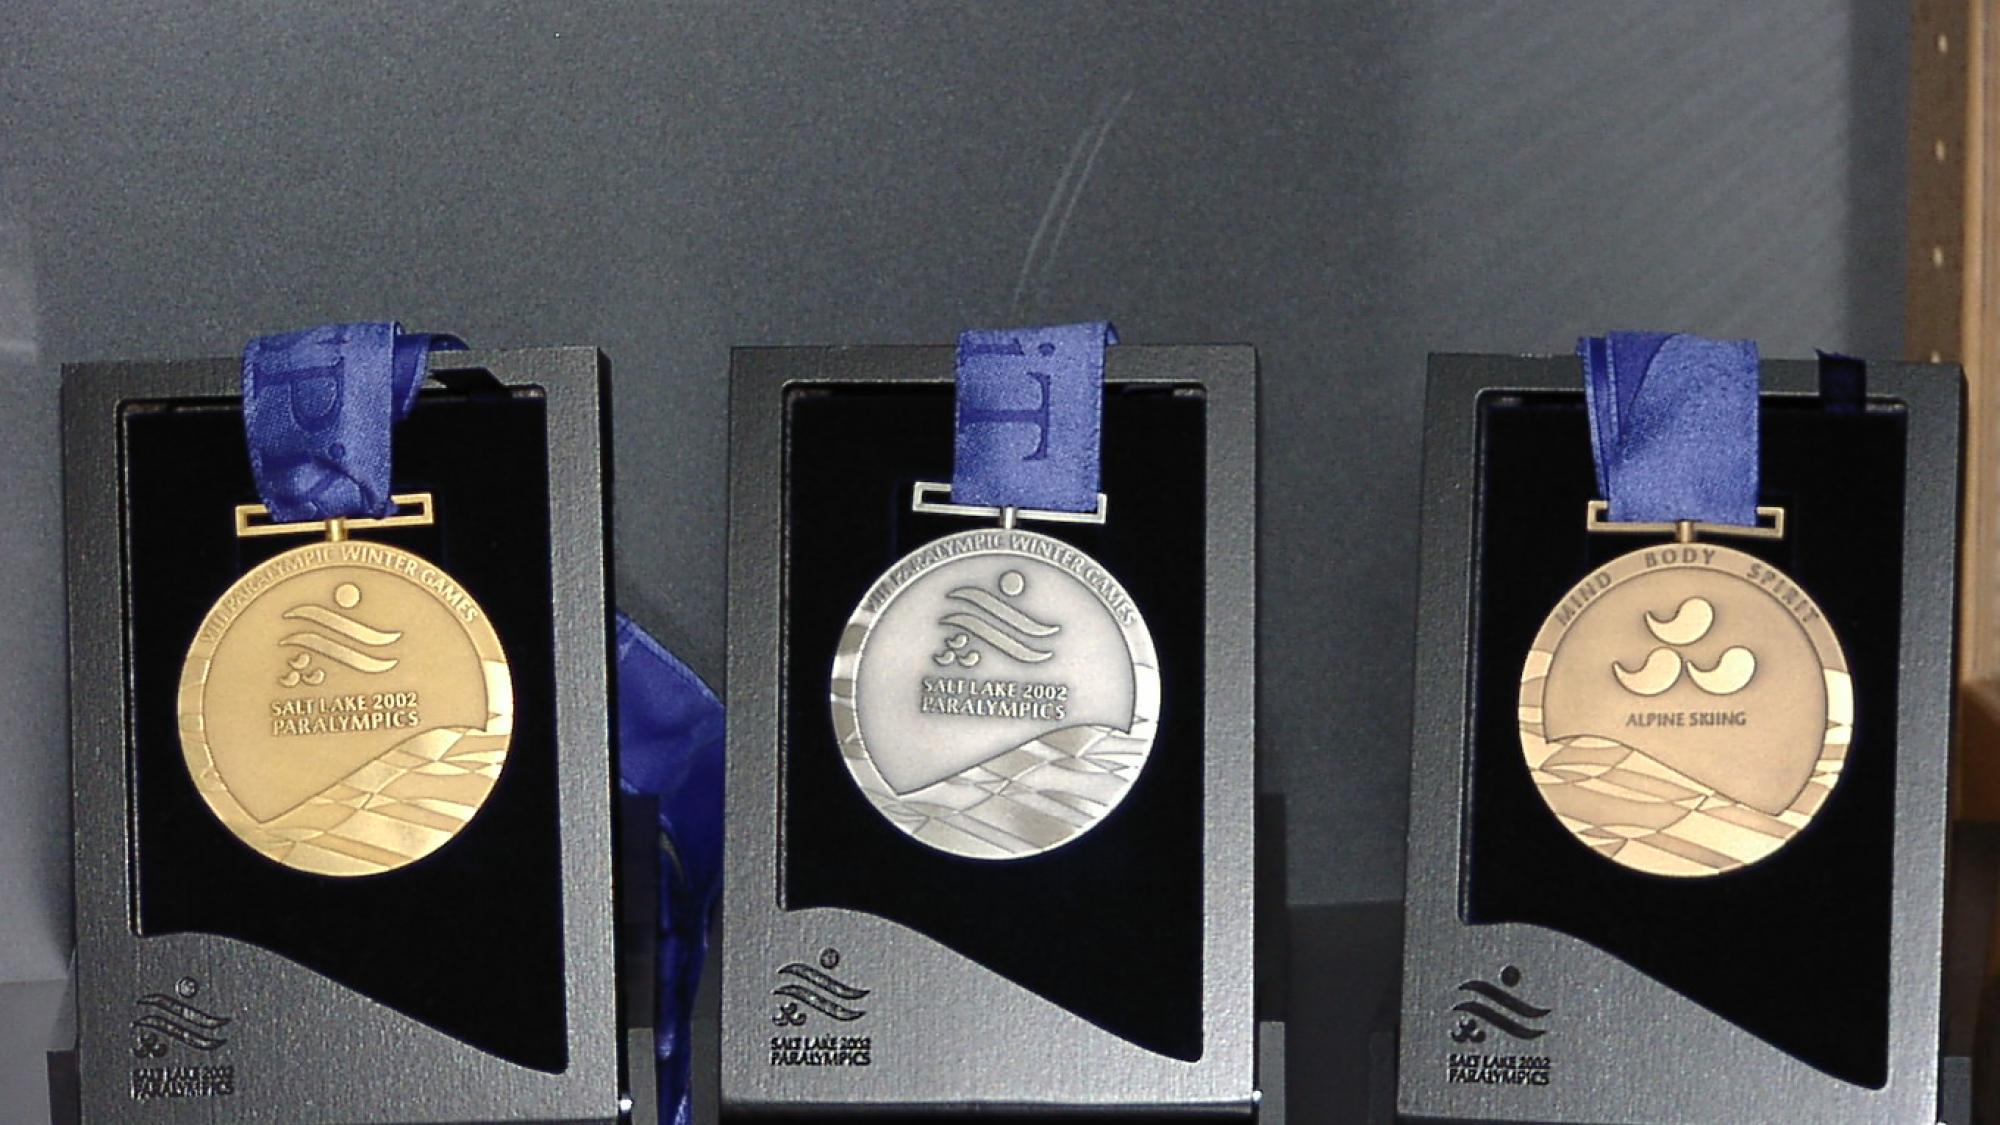 Salt Lake City 2002 Paralympic Winter medals